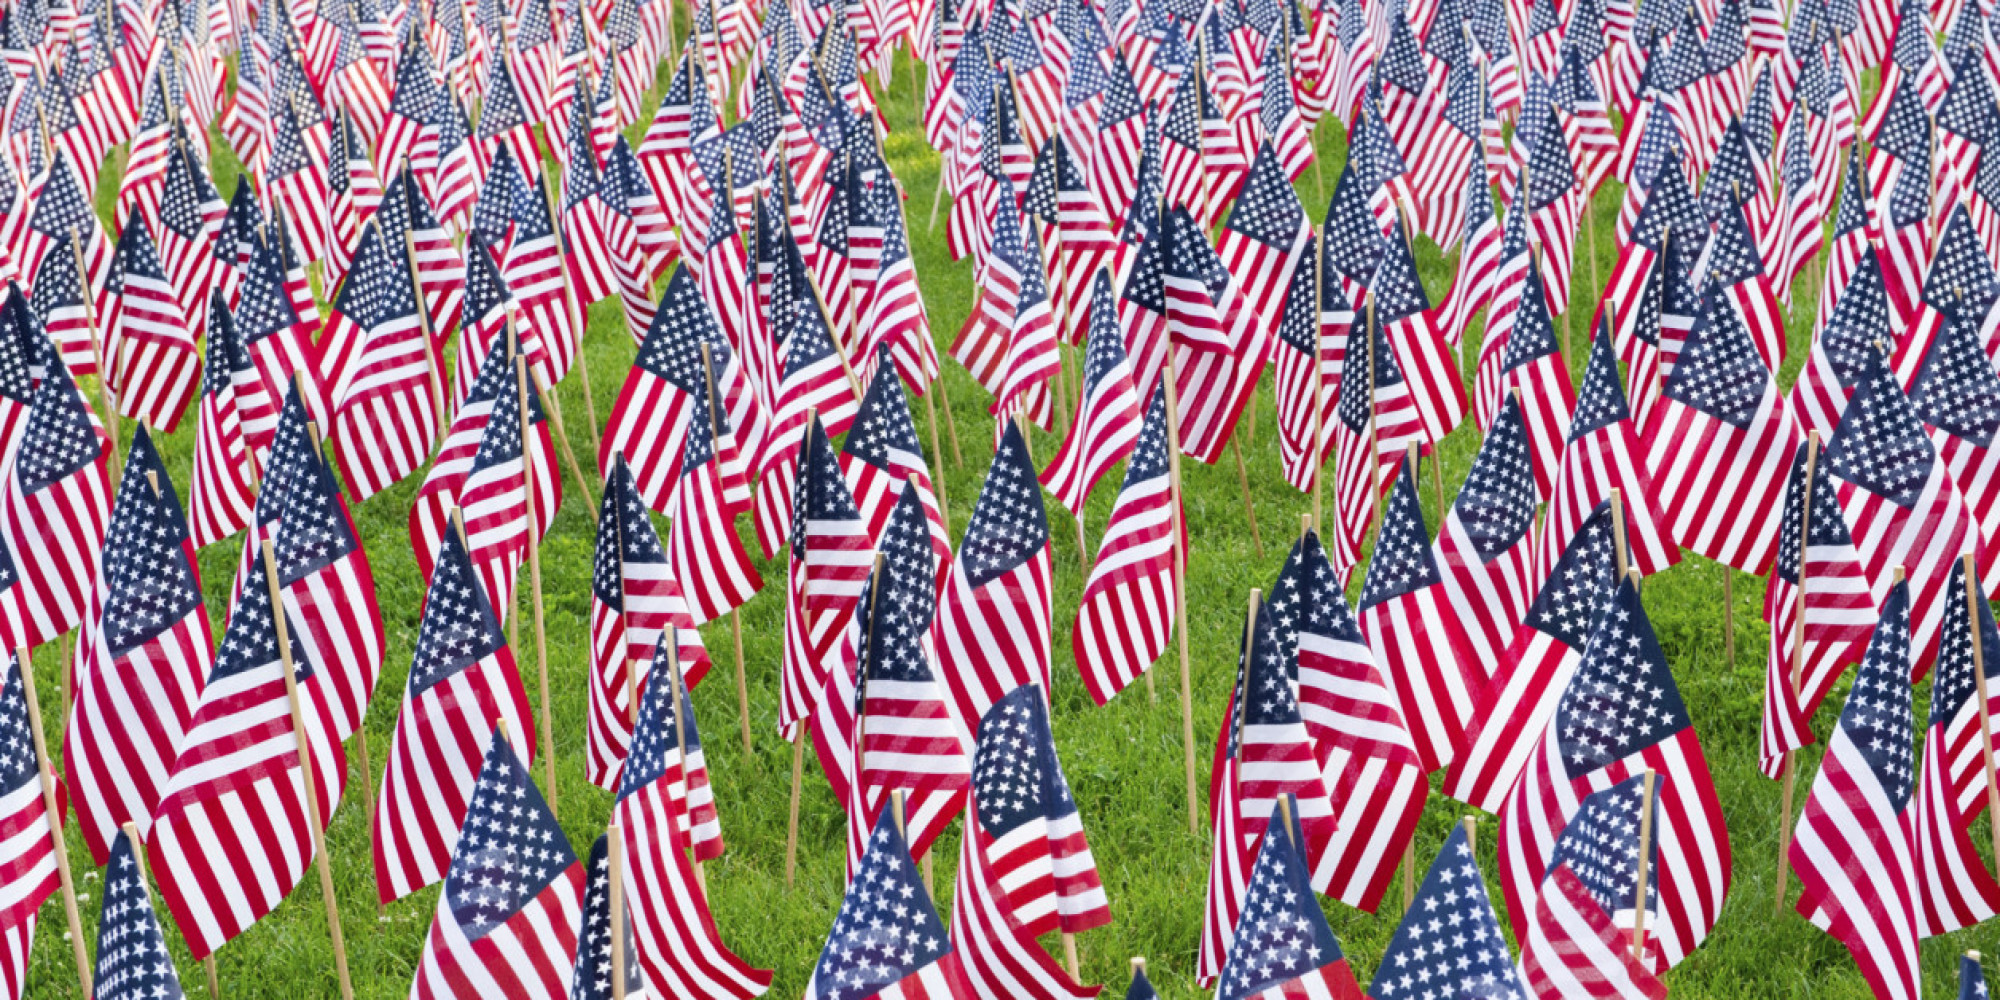 Mich’s Monday Mantra “Reflections On Memorial Day”